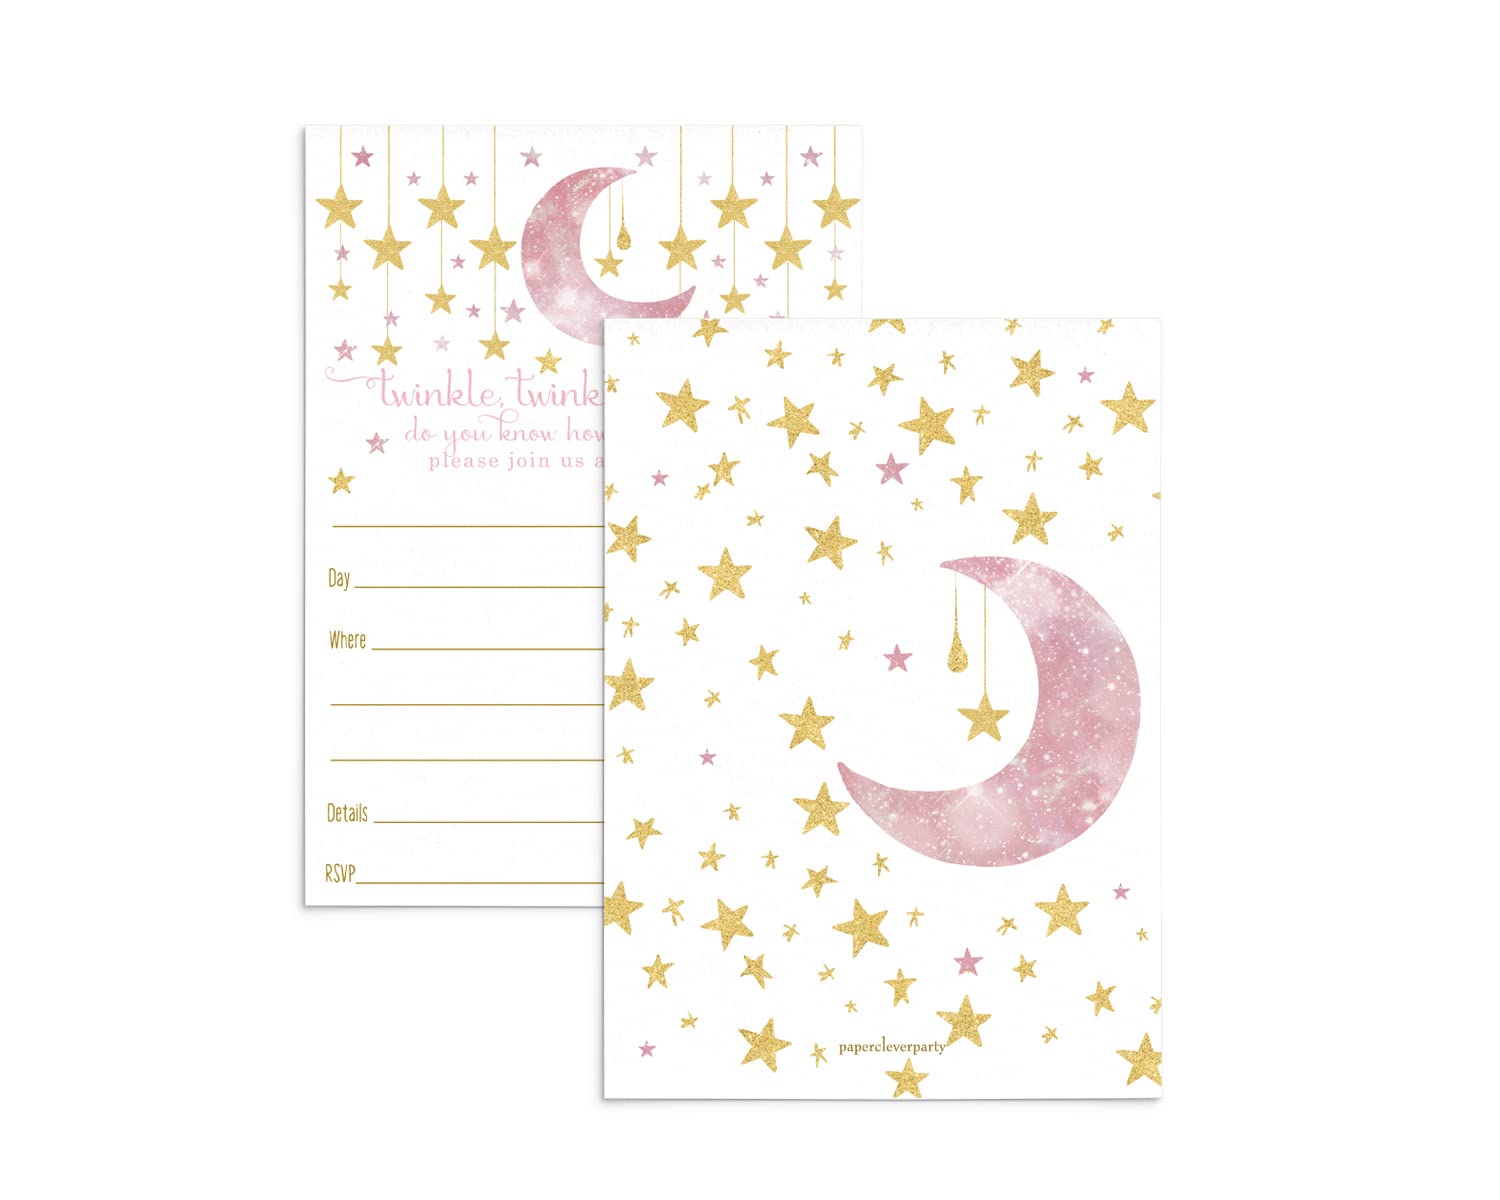 Paper Clever Party Twinkle Little Star Invitations and Envelopes (15 Pack) Blank Invites for Girls Baby Shower, Reveal, Sprinkle – Celestial Theme Design Pink and Gold - Printed 4x6 Size Card Set